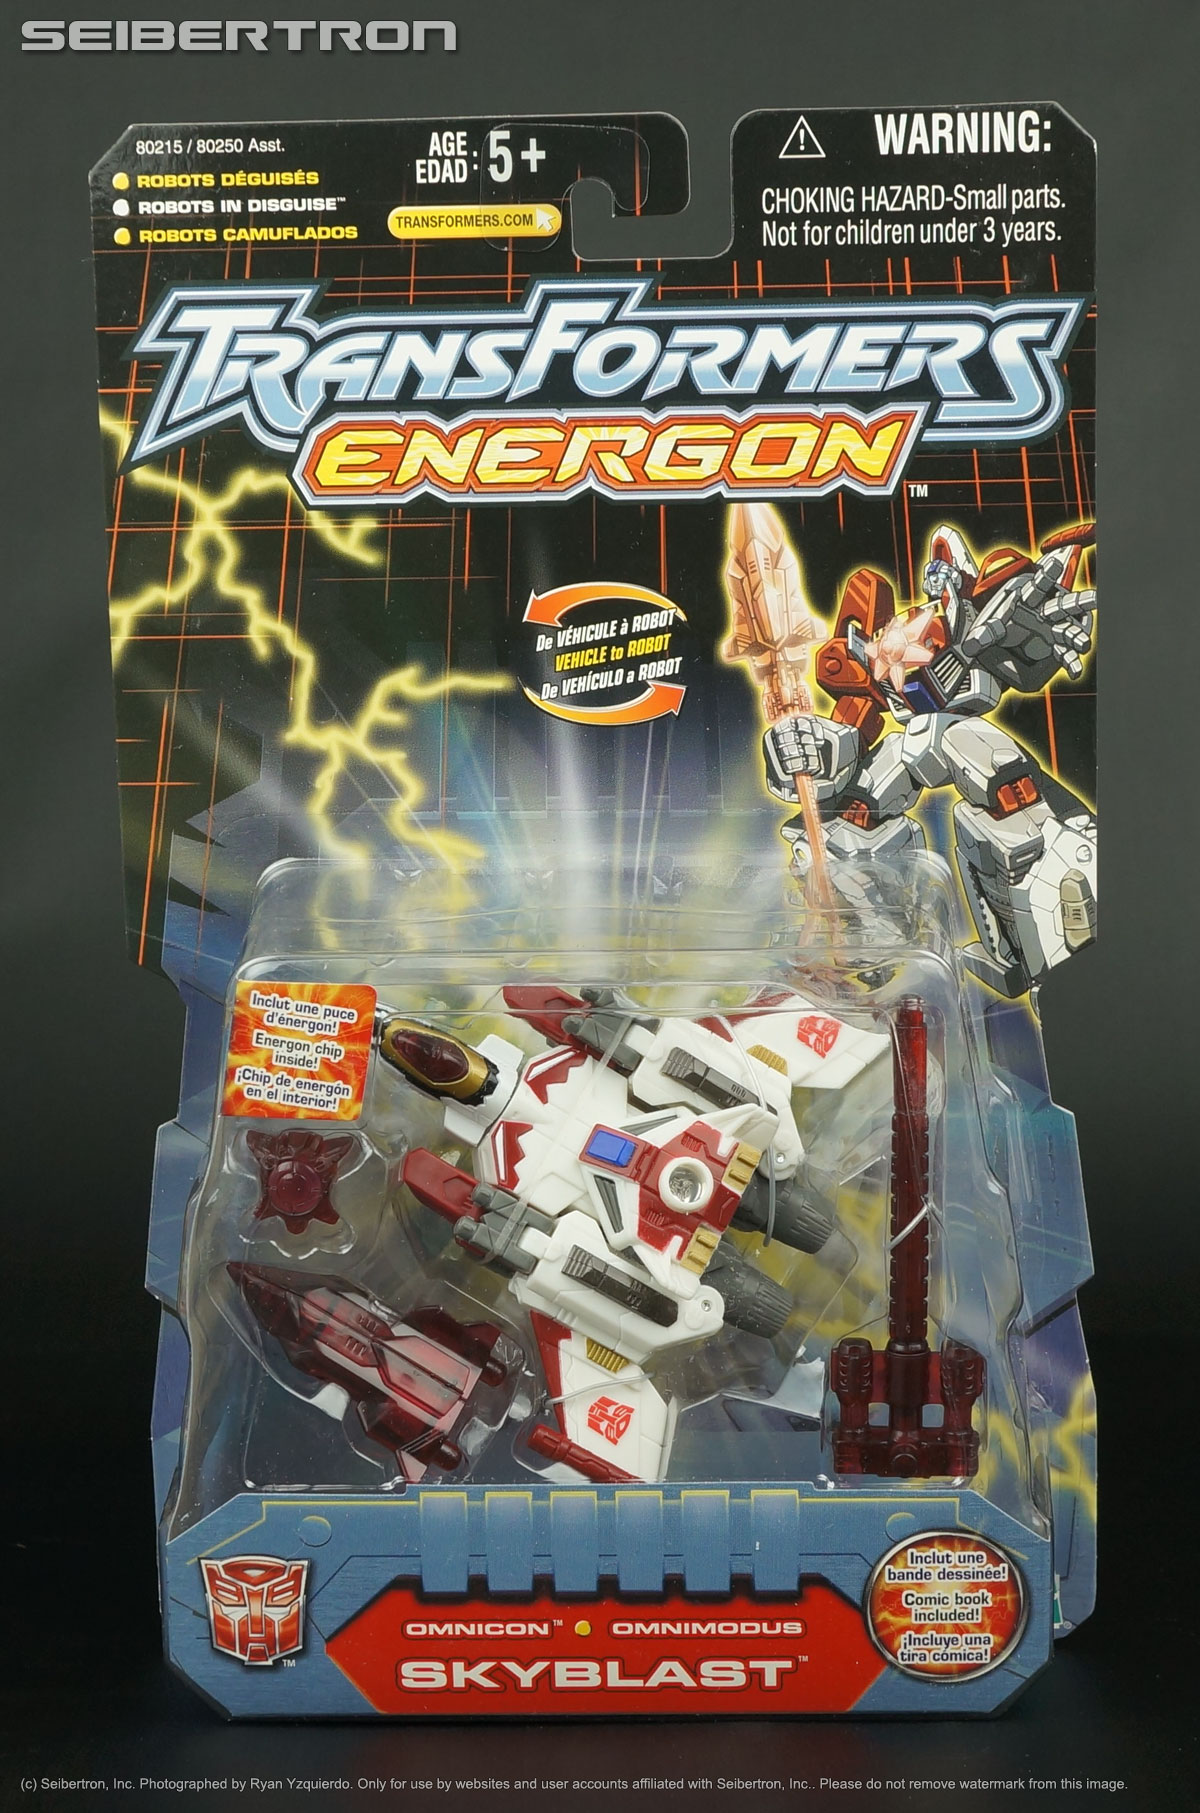 Transformers, Masters of the Universe, Teenage Mutant Ninja Turtles, Comic Books, and more! listings from Seibertron.com: SKYBLAST Transformers Energon Basic Scout Hasbro 2004 New